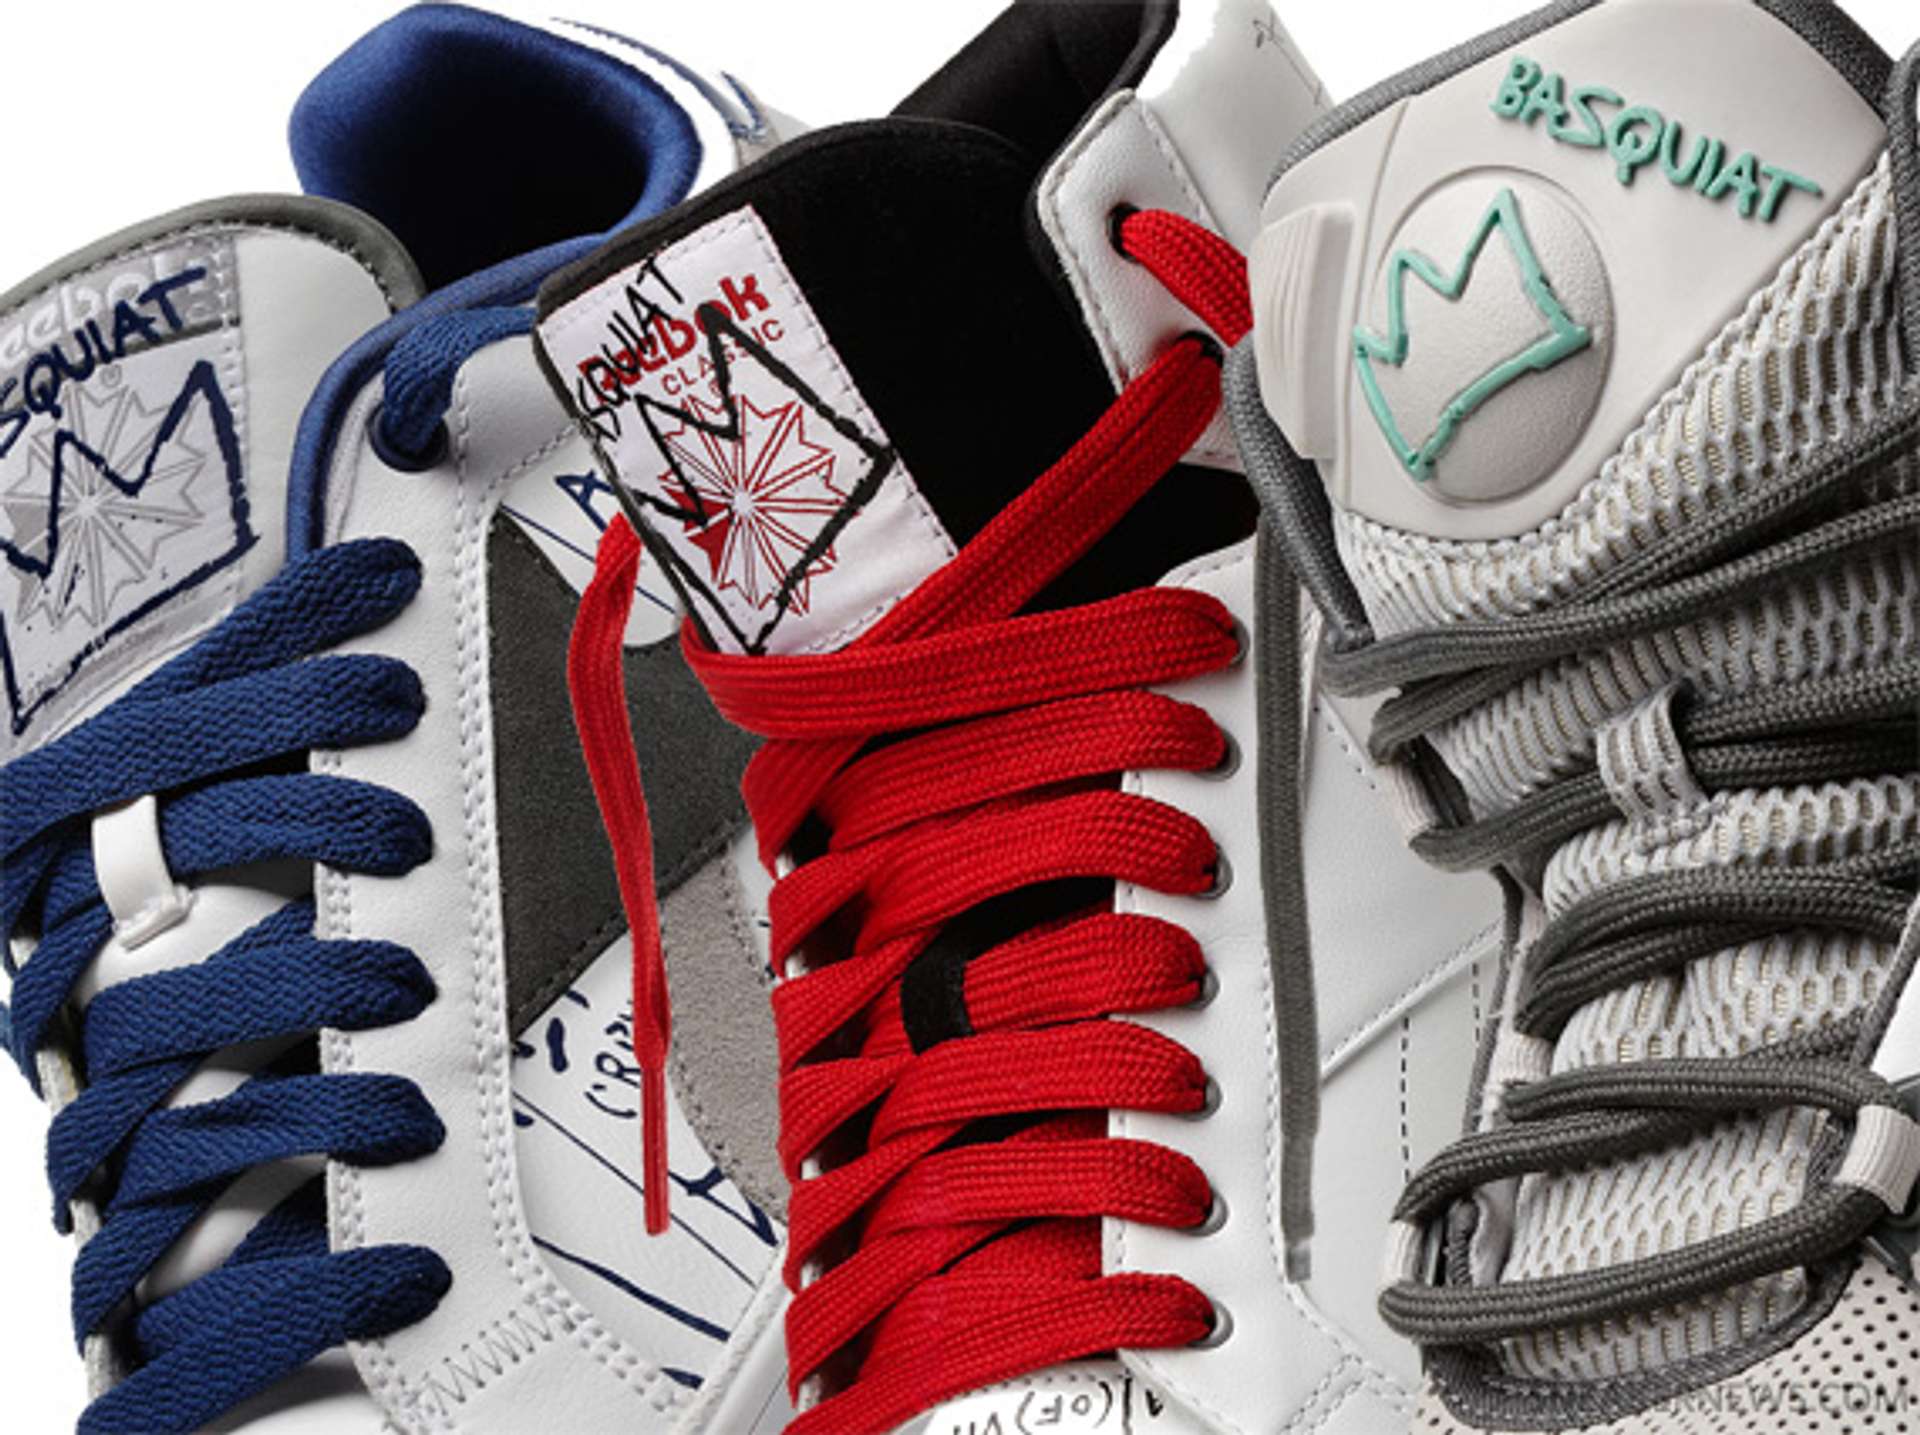 An image of three models of sneakers from the collaboration between Reebok and Basquiat.